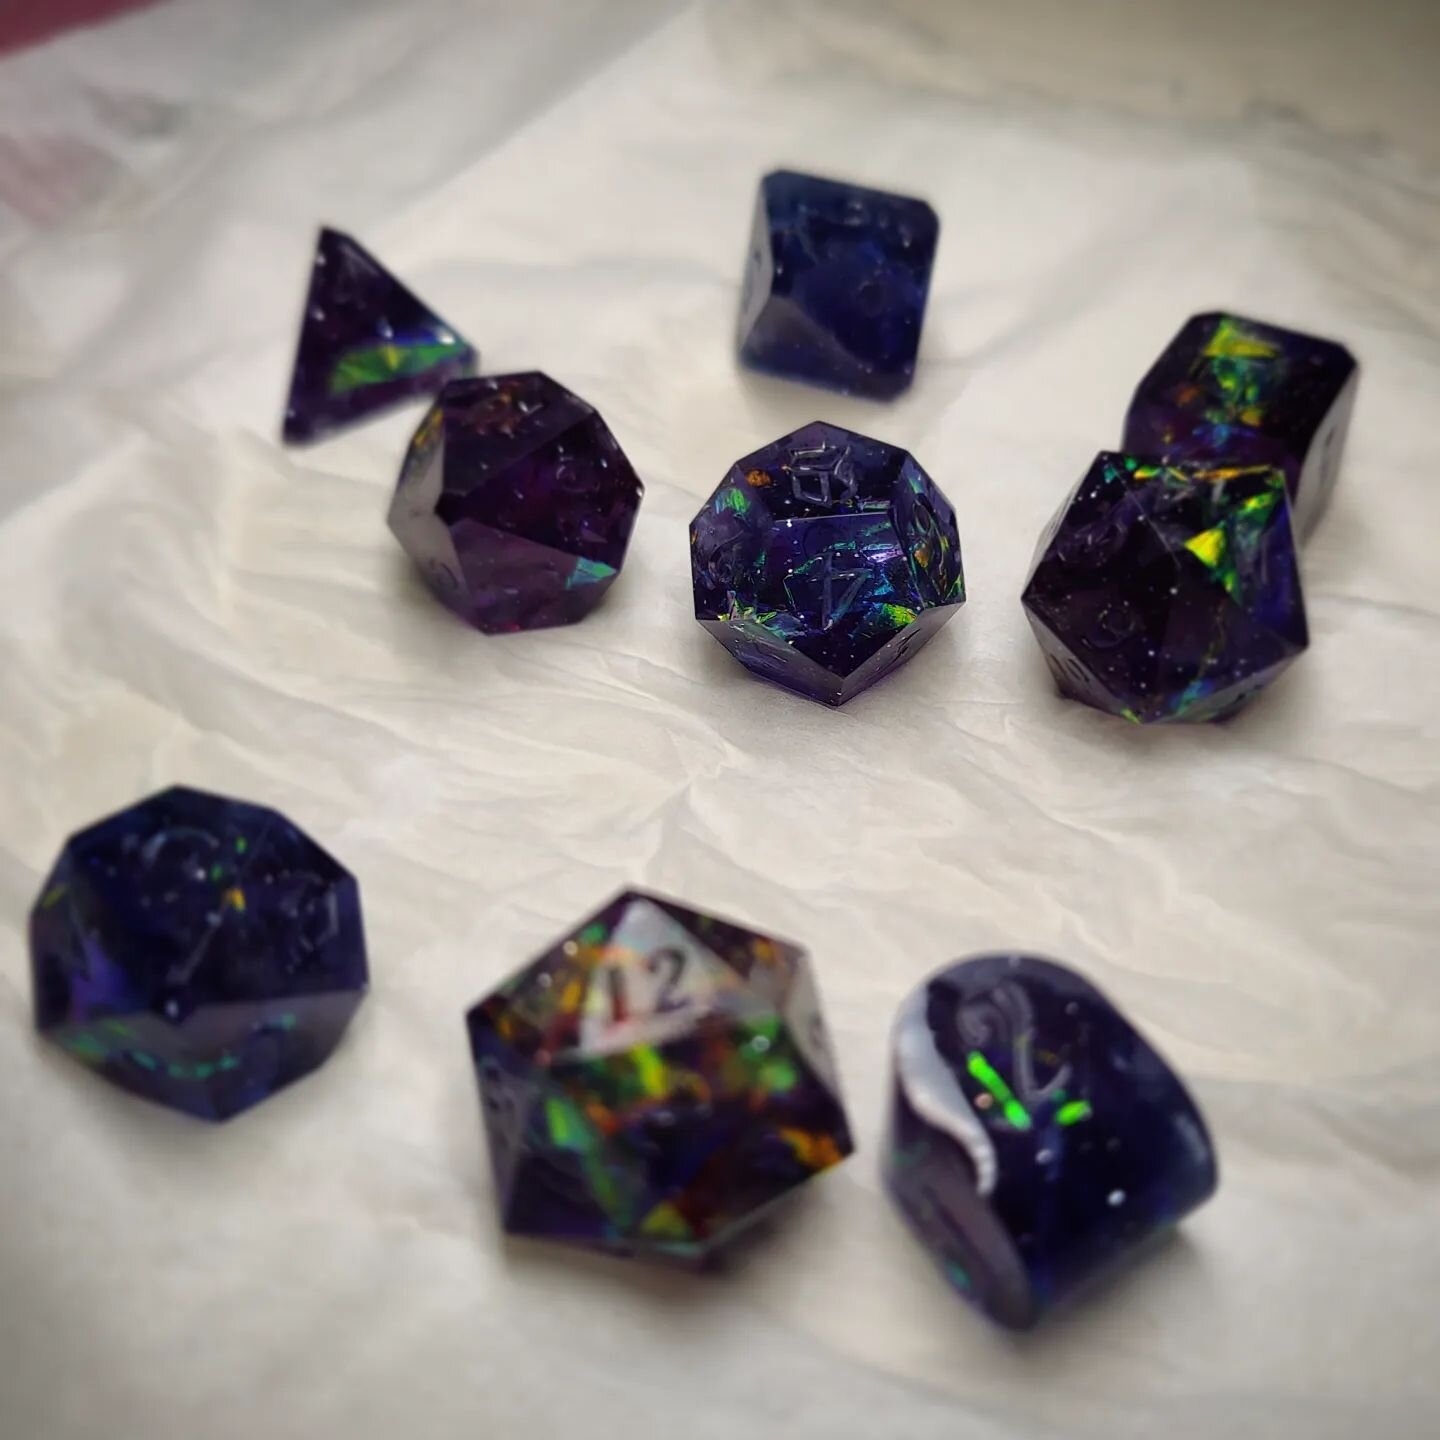 Hey folks!  Been on a bit of a break recently, my part-time job is keeping me busy, but I'm finally getting back to finishing some dice.  I've also been very busy in the workshop doing some much needed renovations!! 

Really pleased with how these di